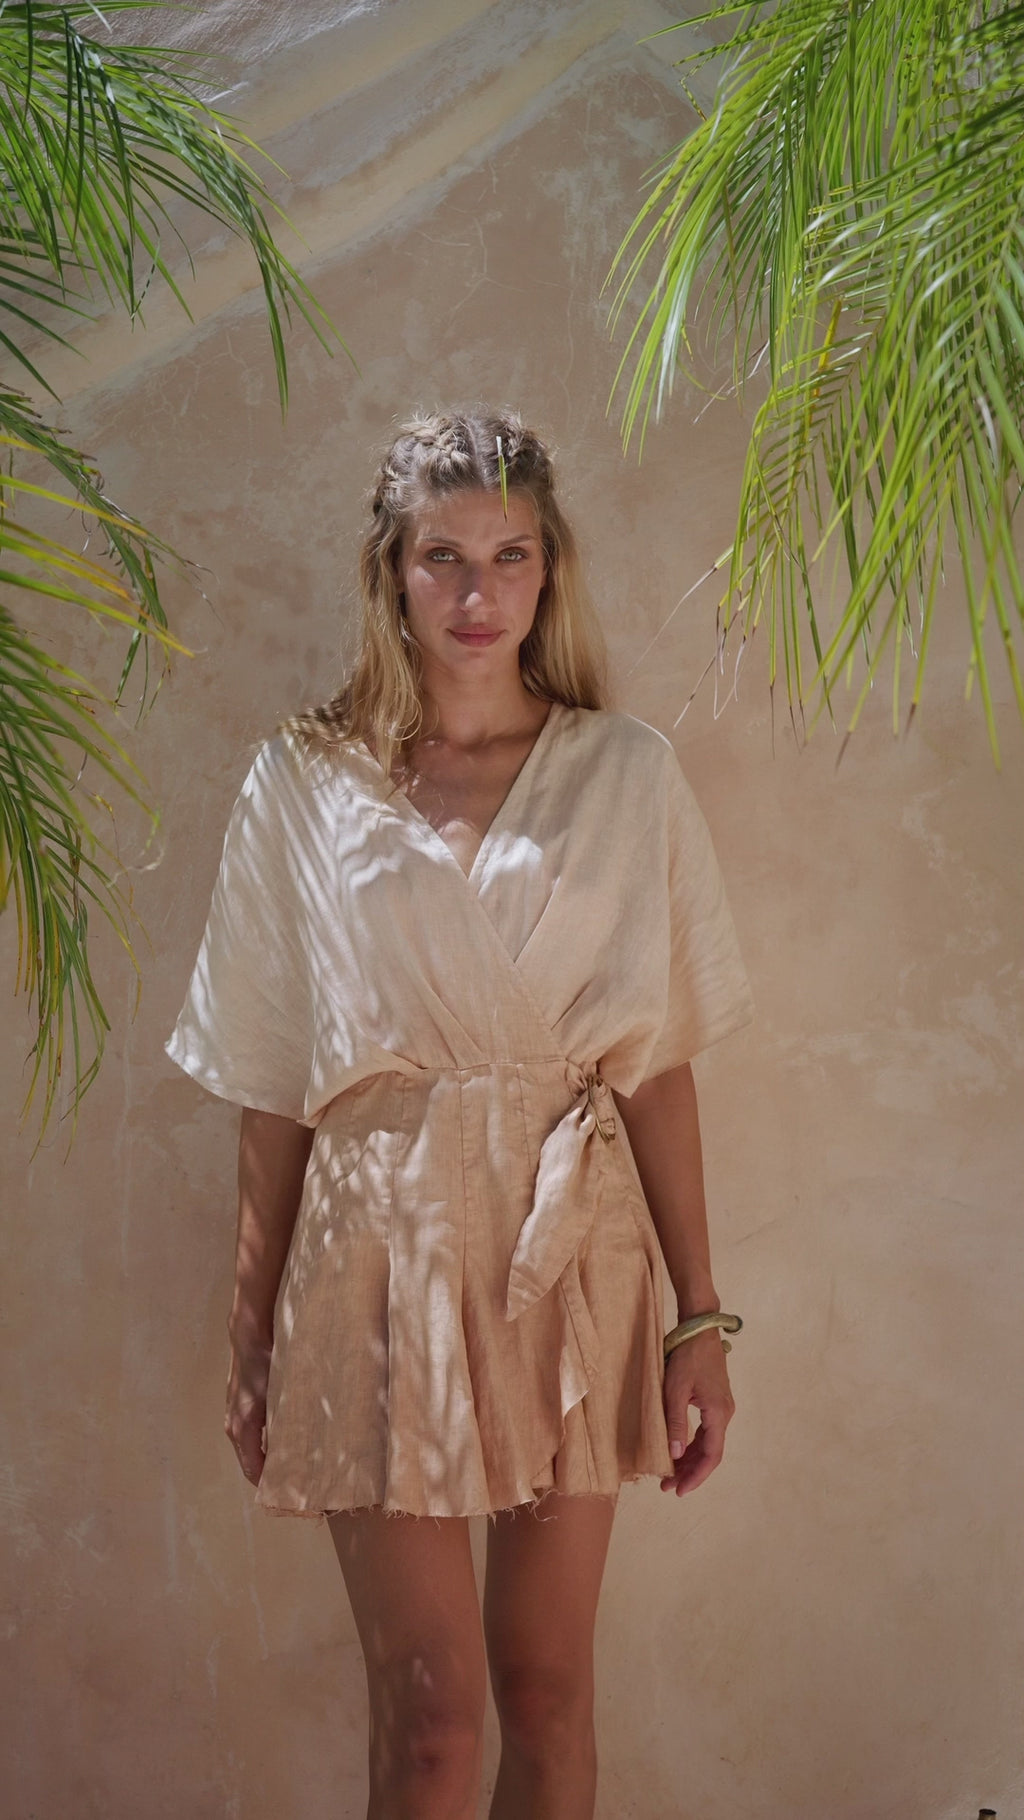 Make a statement with the Multiway Kimono Dress by Aya Sacred Wear.